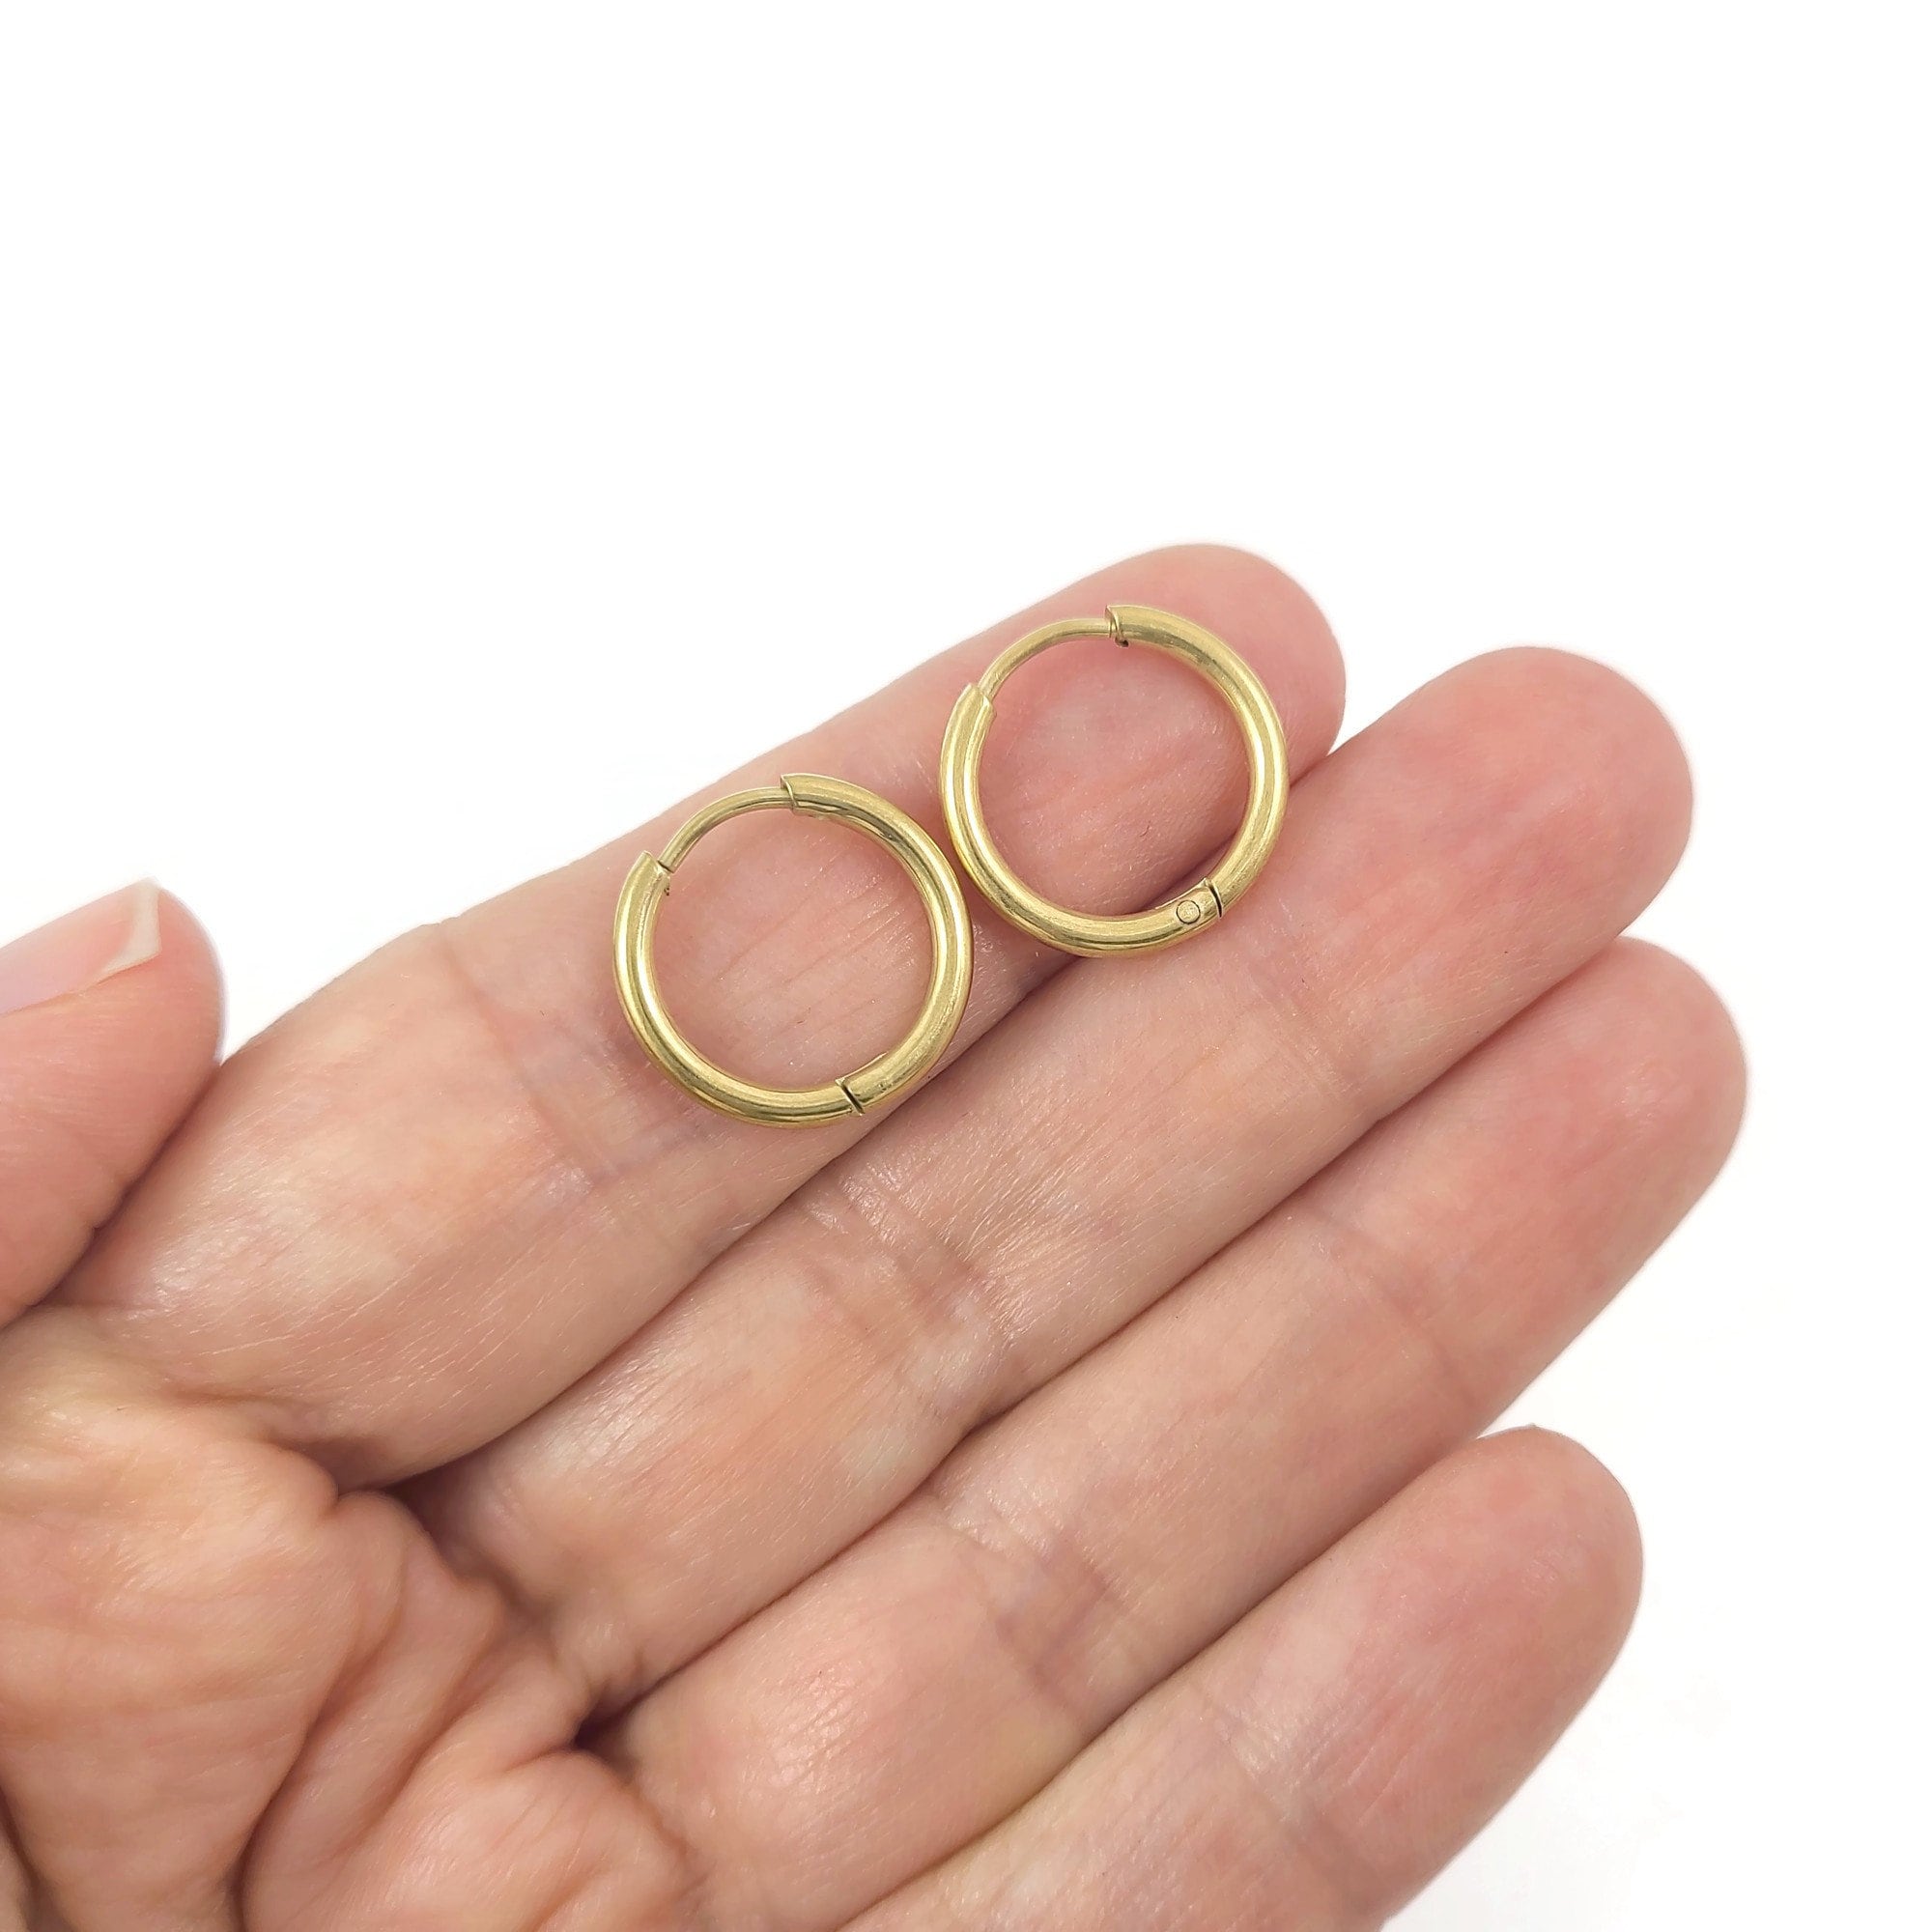 Gold stainless steel earring hoops, Hypoallergenic earring findings, Gold plated huggie hoops, 4 sizes available